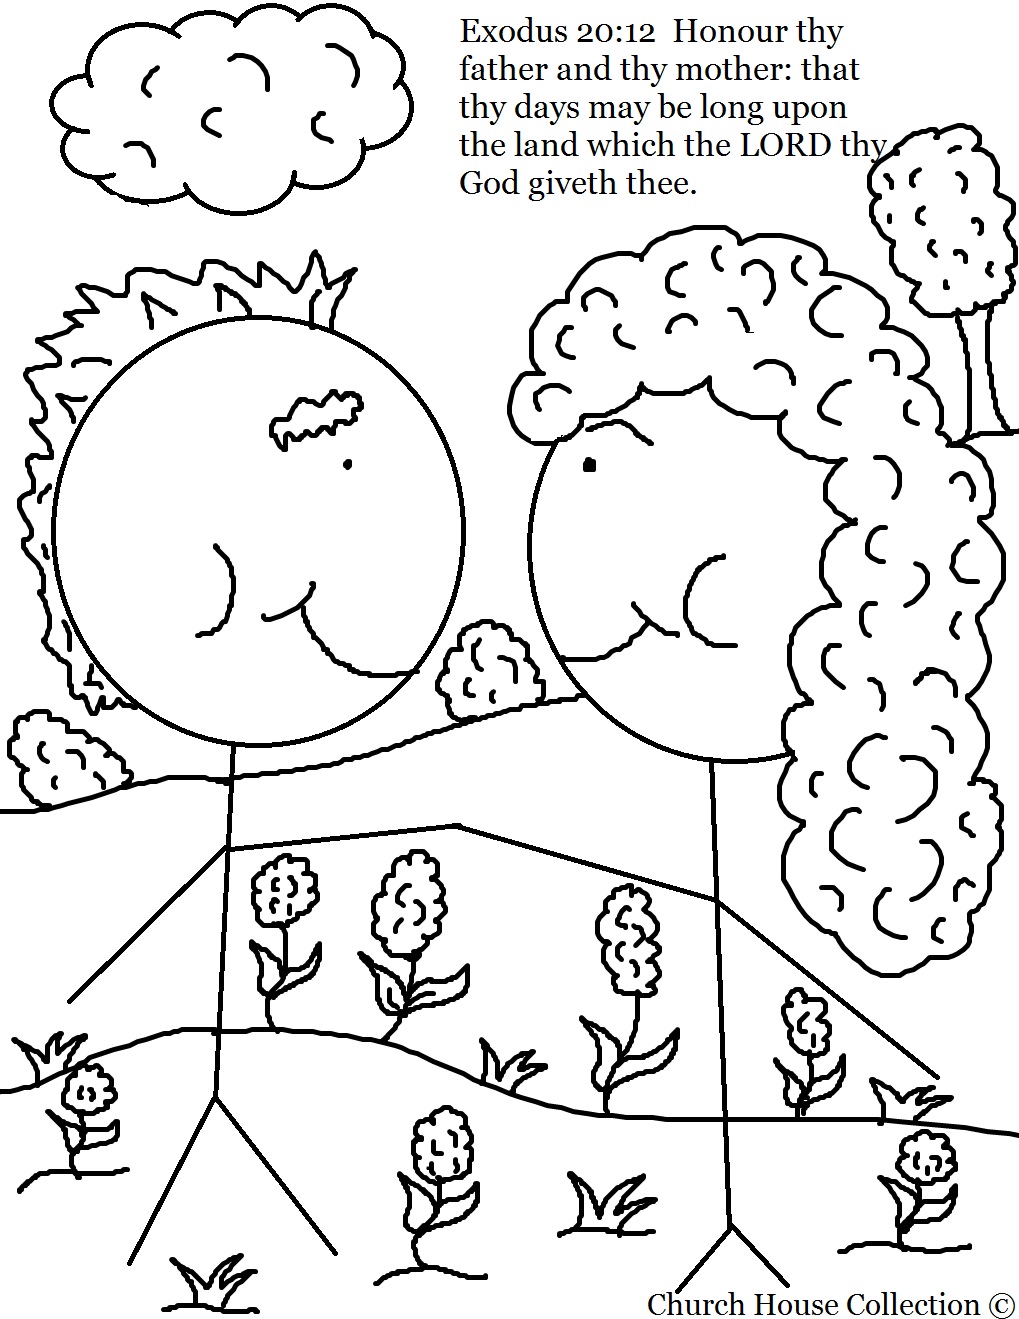 children-obey-your-parents-coloring-page-coloring-pages